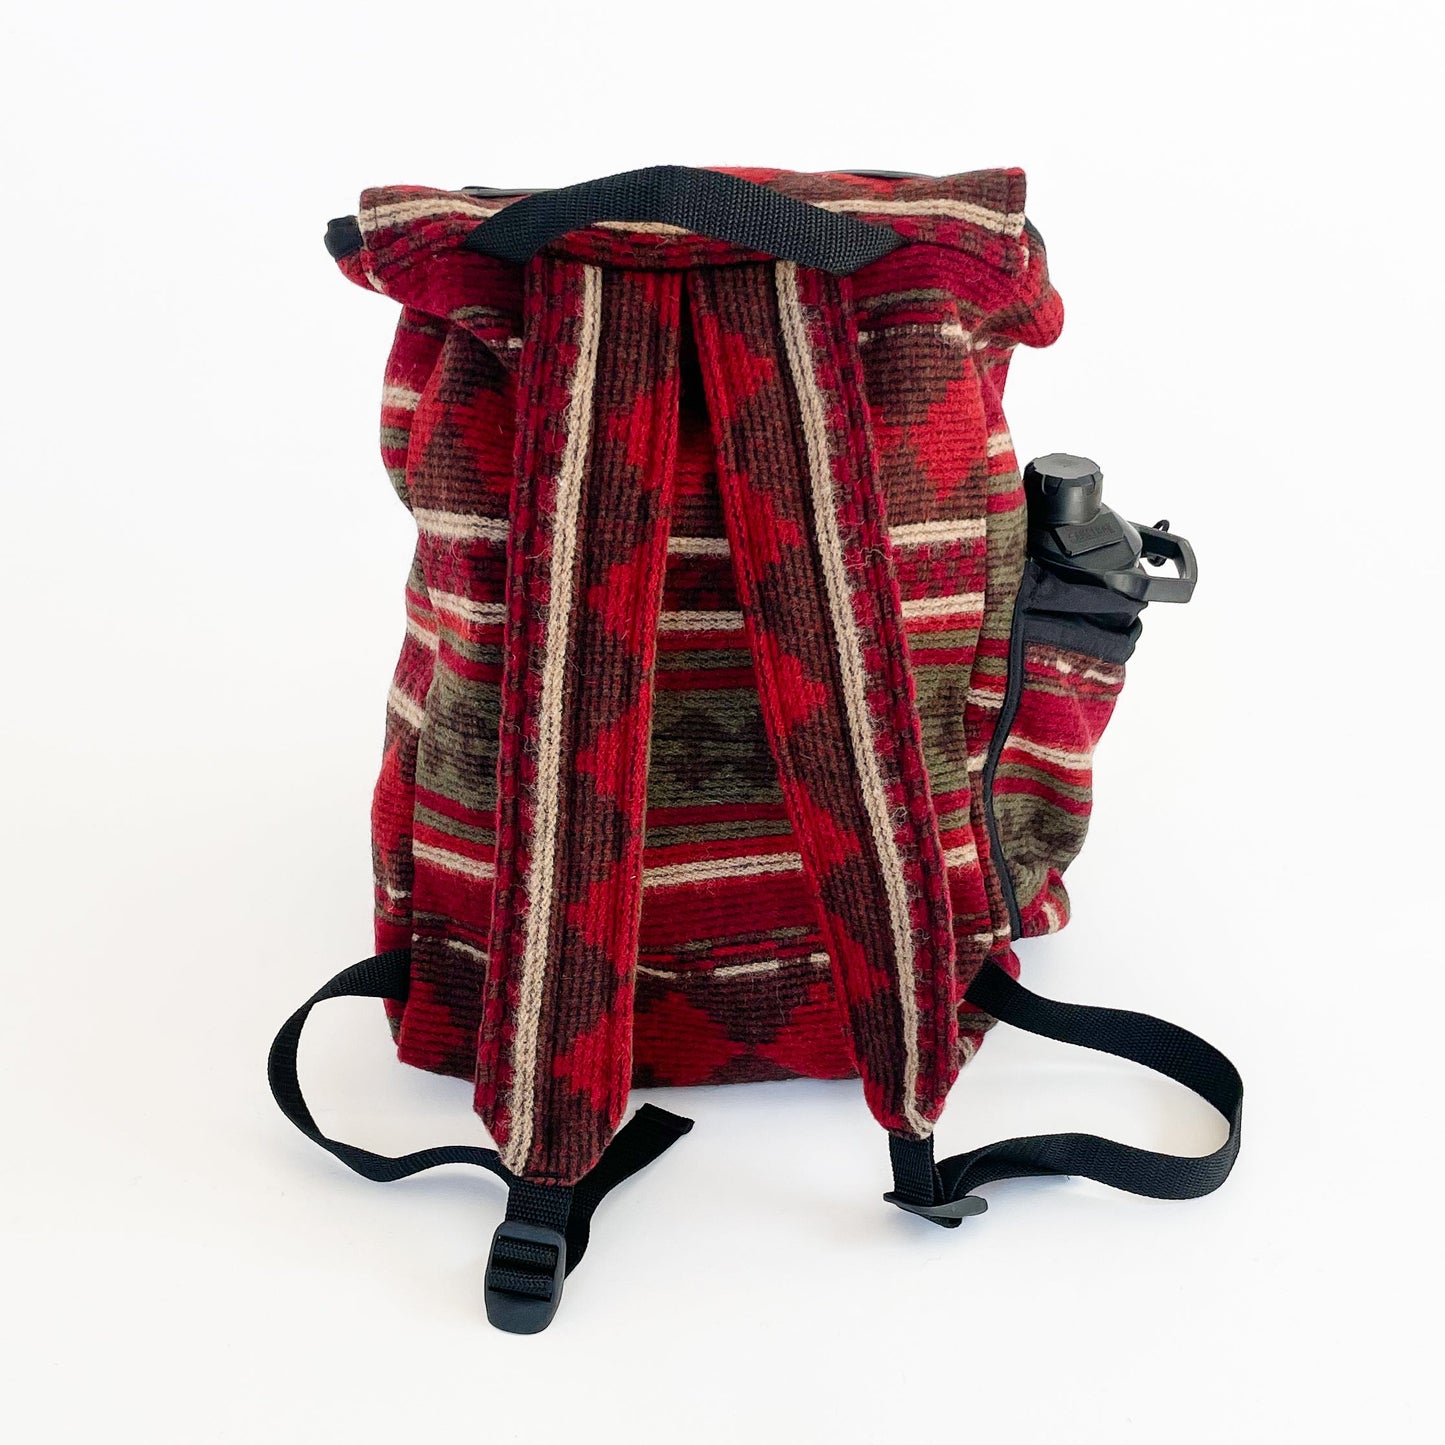 Wool back pack rust, olive and beige print, shown with water bottle in side pocket - back view